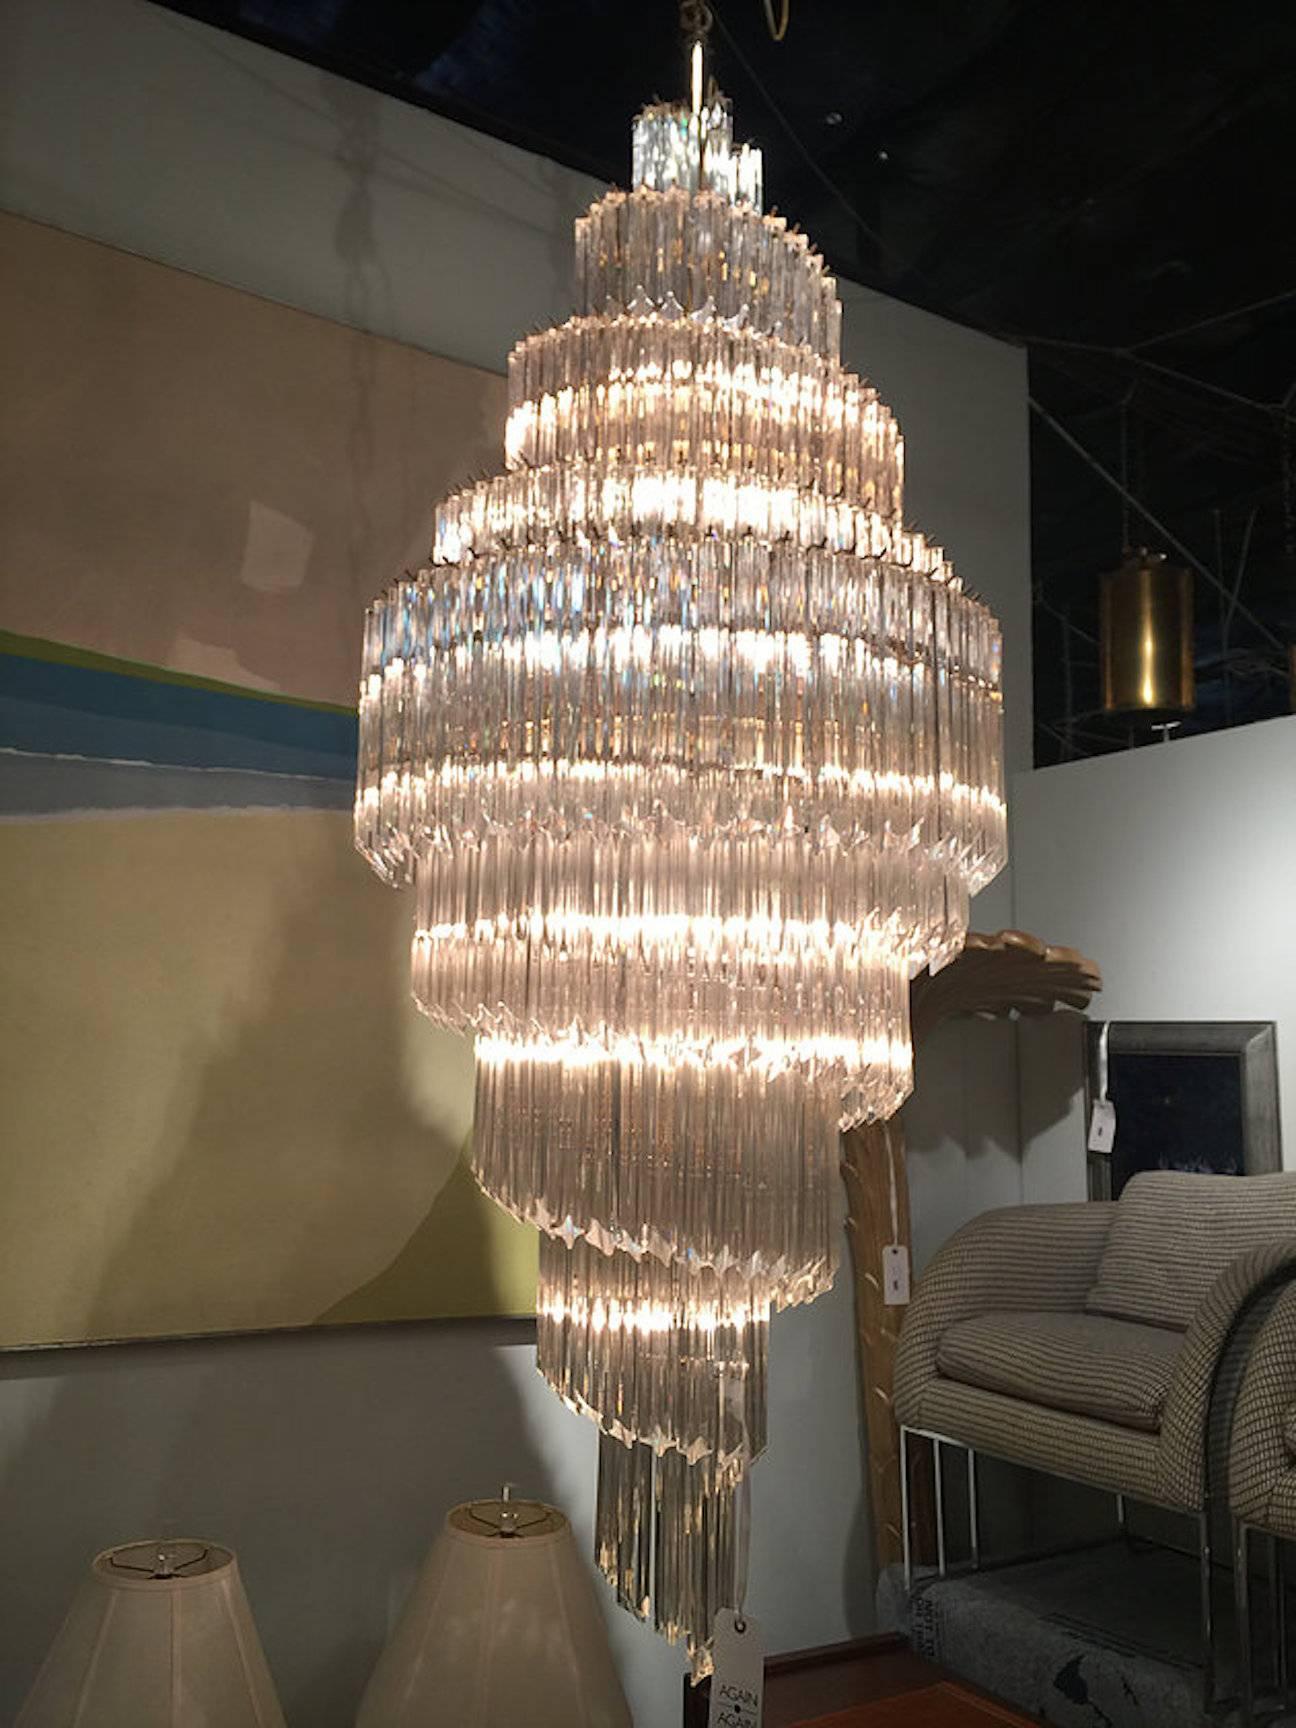 Monumental Spiral crystal Venini chandelier, circa 1960s

Contact us for wear and condition.

Dimensions: 27" dia x 68" T.